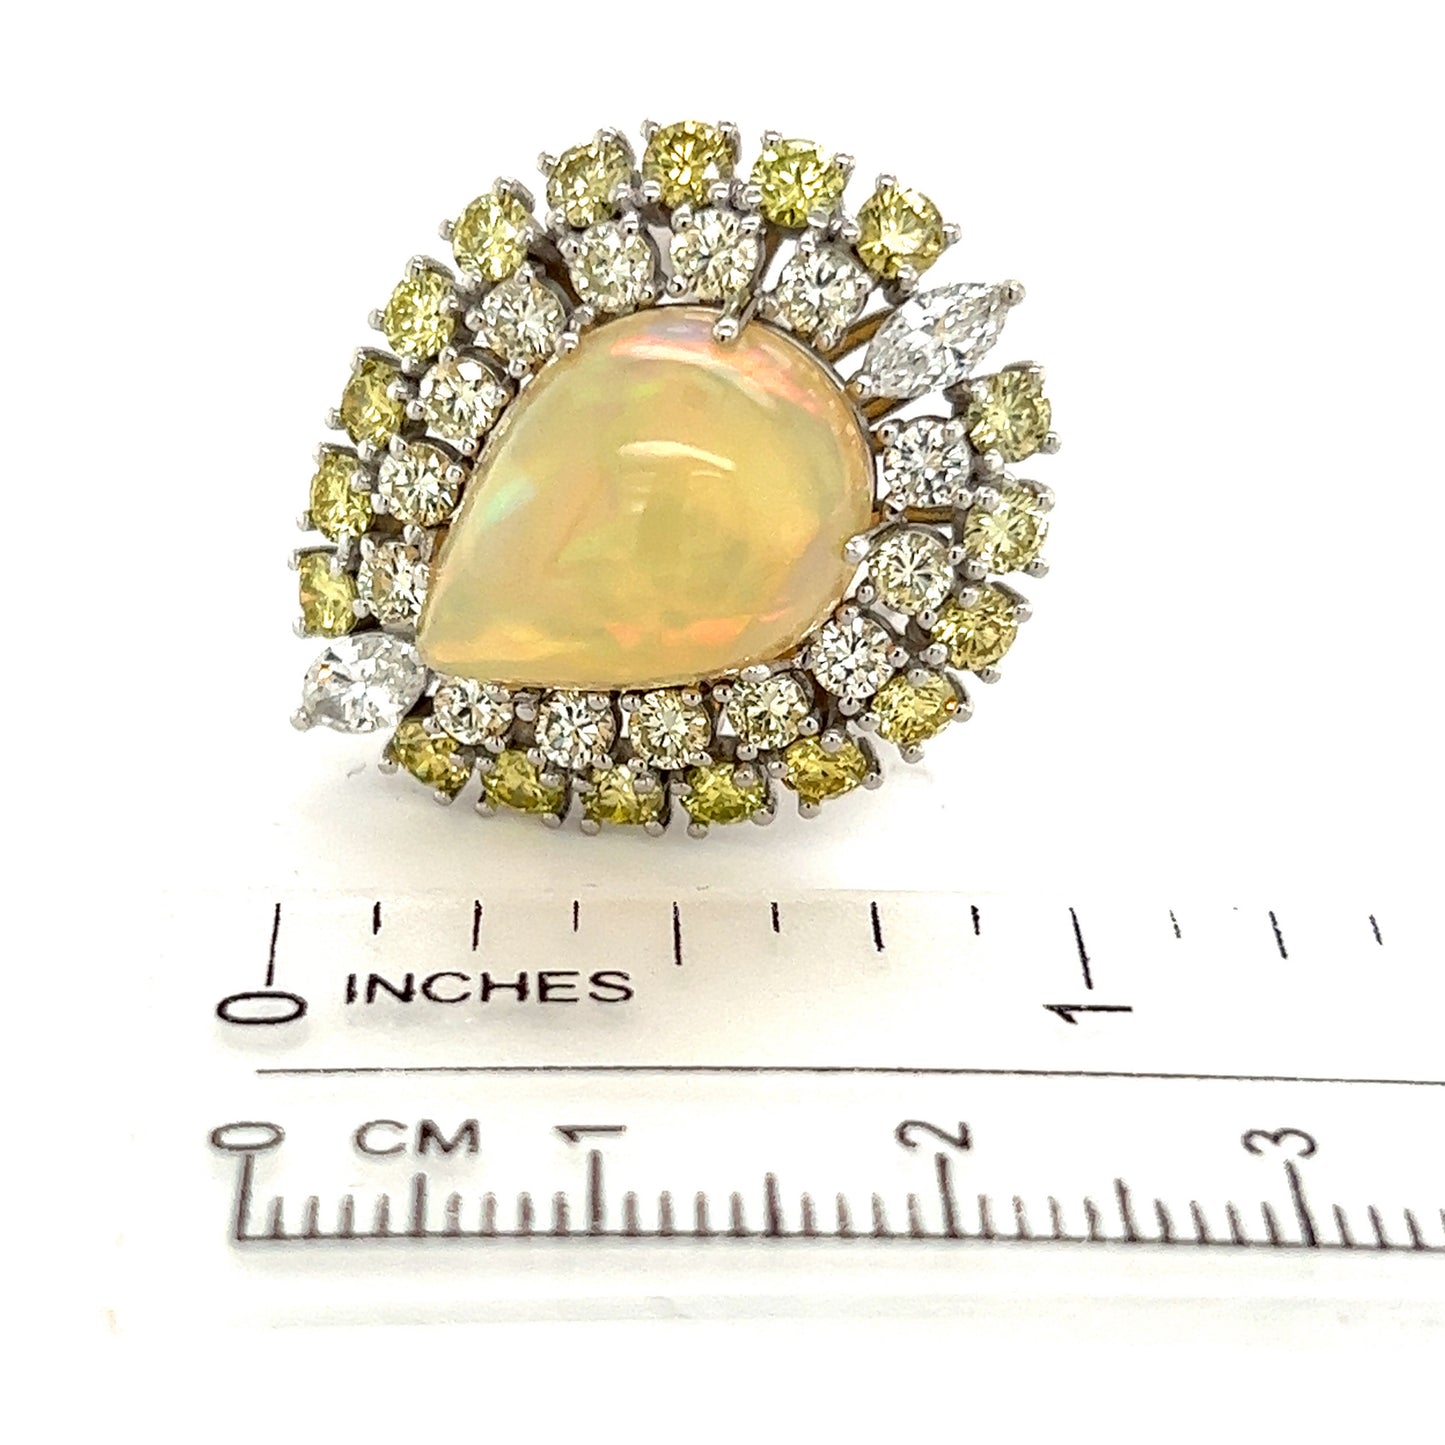 Natural White Opal Diamond Ring 14k Gold 11 TCW Certified $12,950 210739 - Certified Estate Jewelry